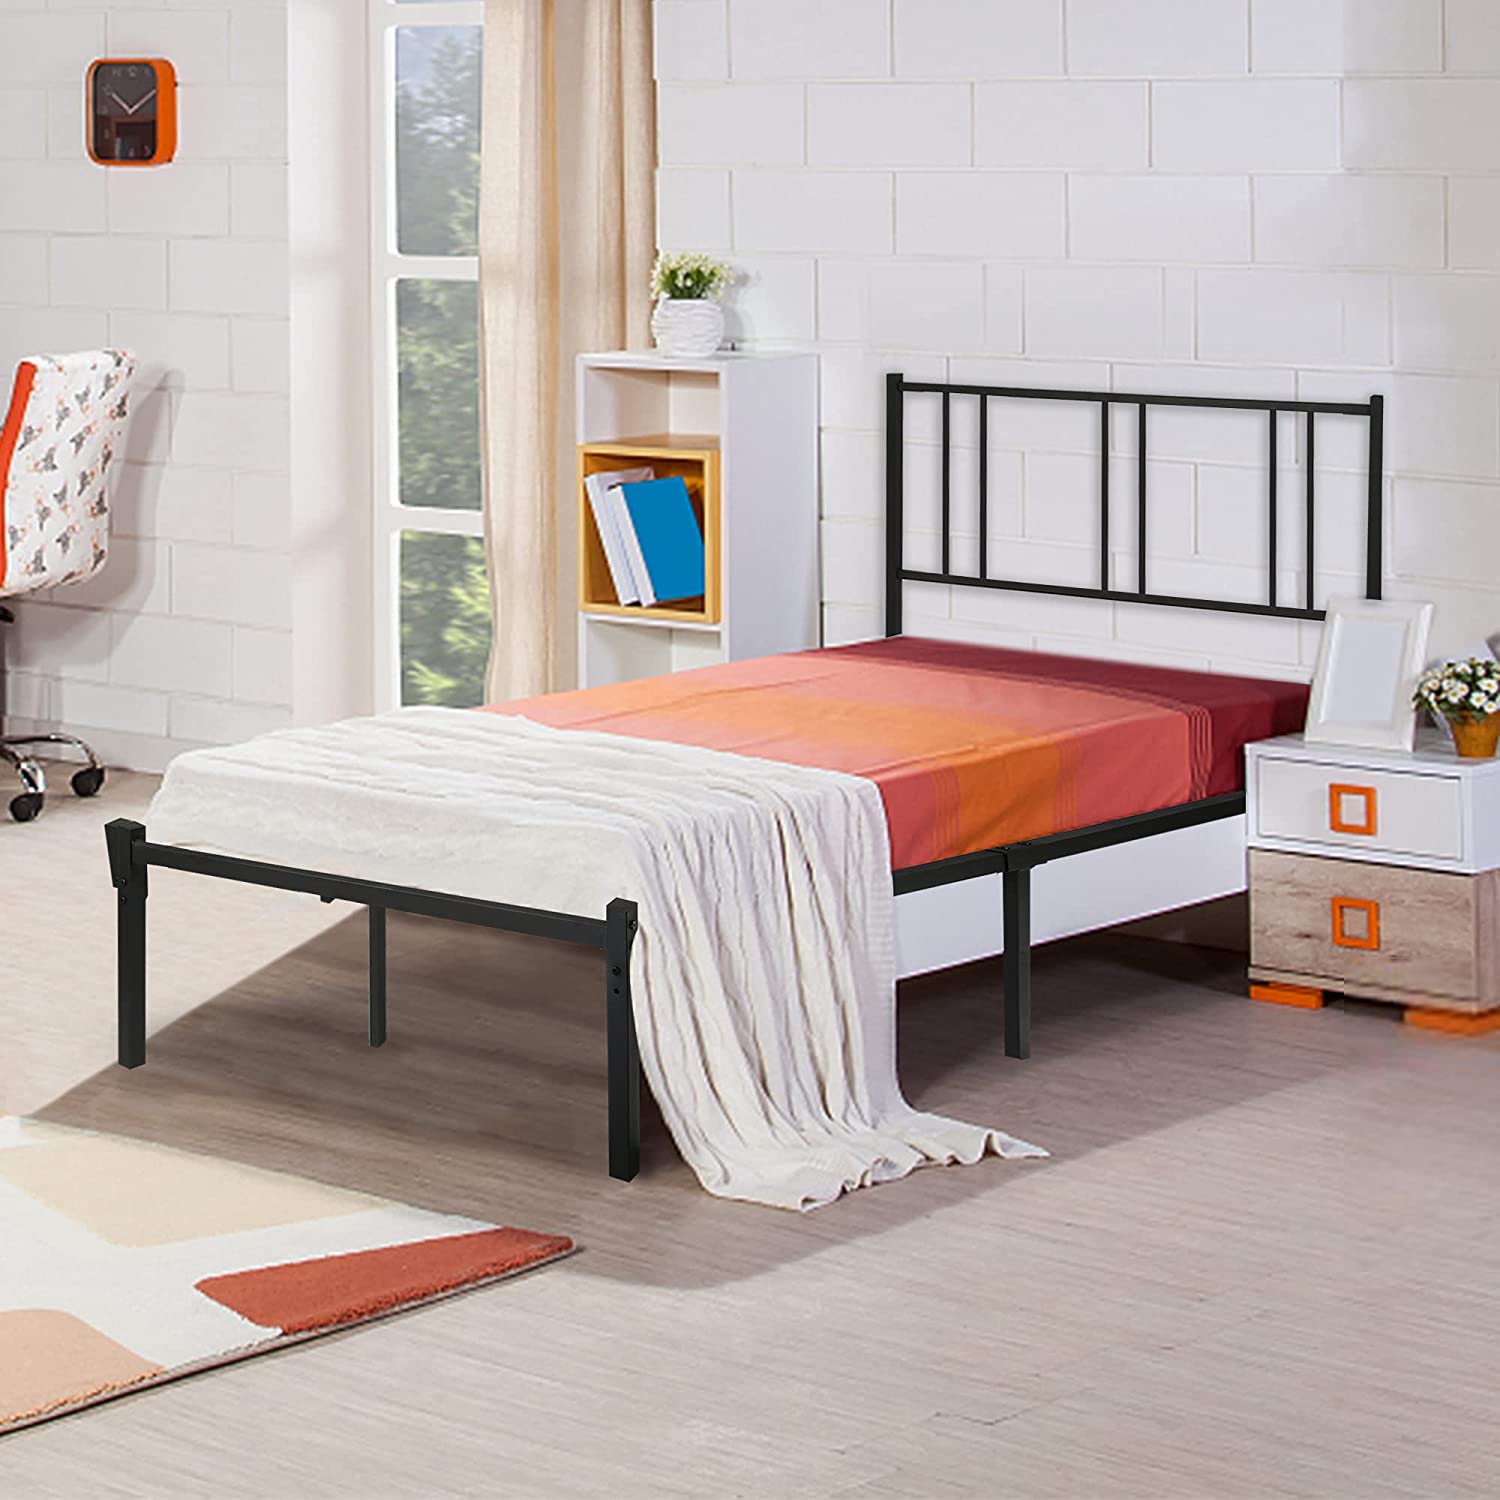 Twin Size Platform Bed with Headboard, Sturdy Metal Frame Noise Free, Easy to Assemble